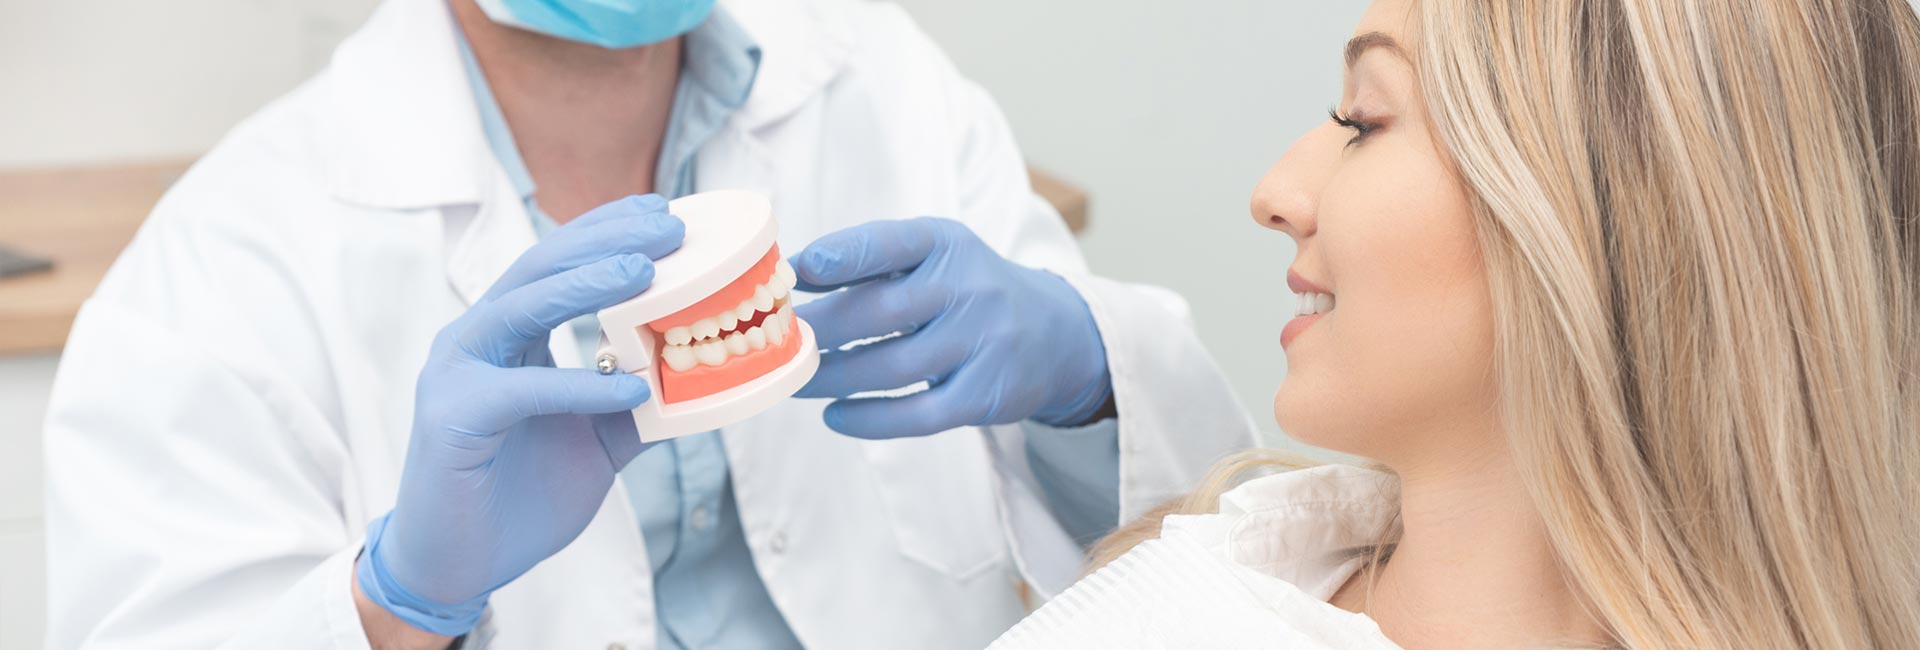 Dentist showing a teeth model to the patient